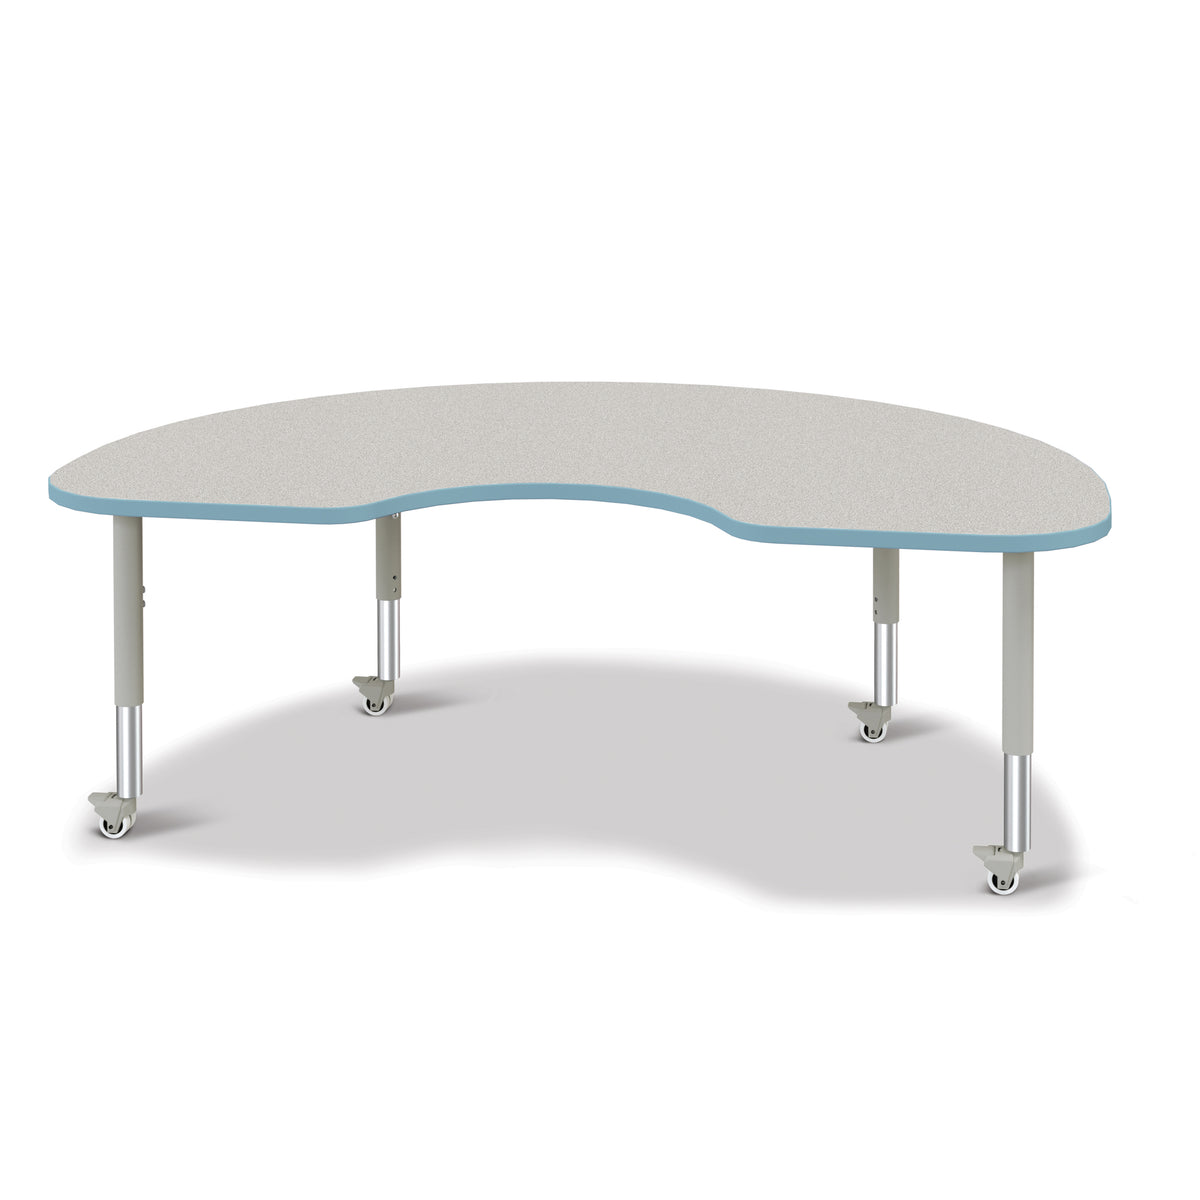 6423JCM131, Berries Kidney Activity Table - 48" X 72", Mobile - Freckled Gray/Coastal Blue/Gray